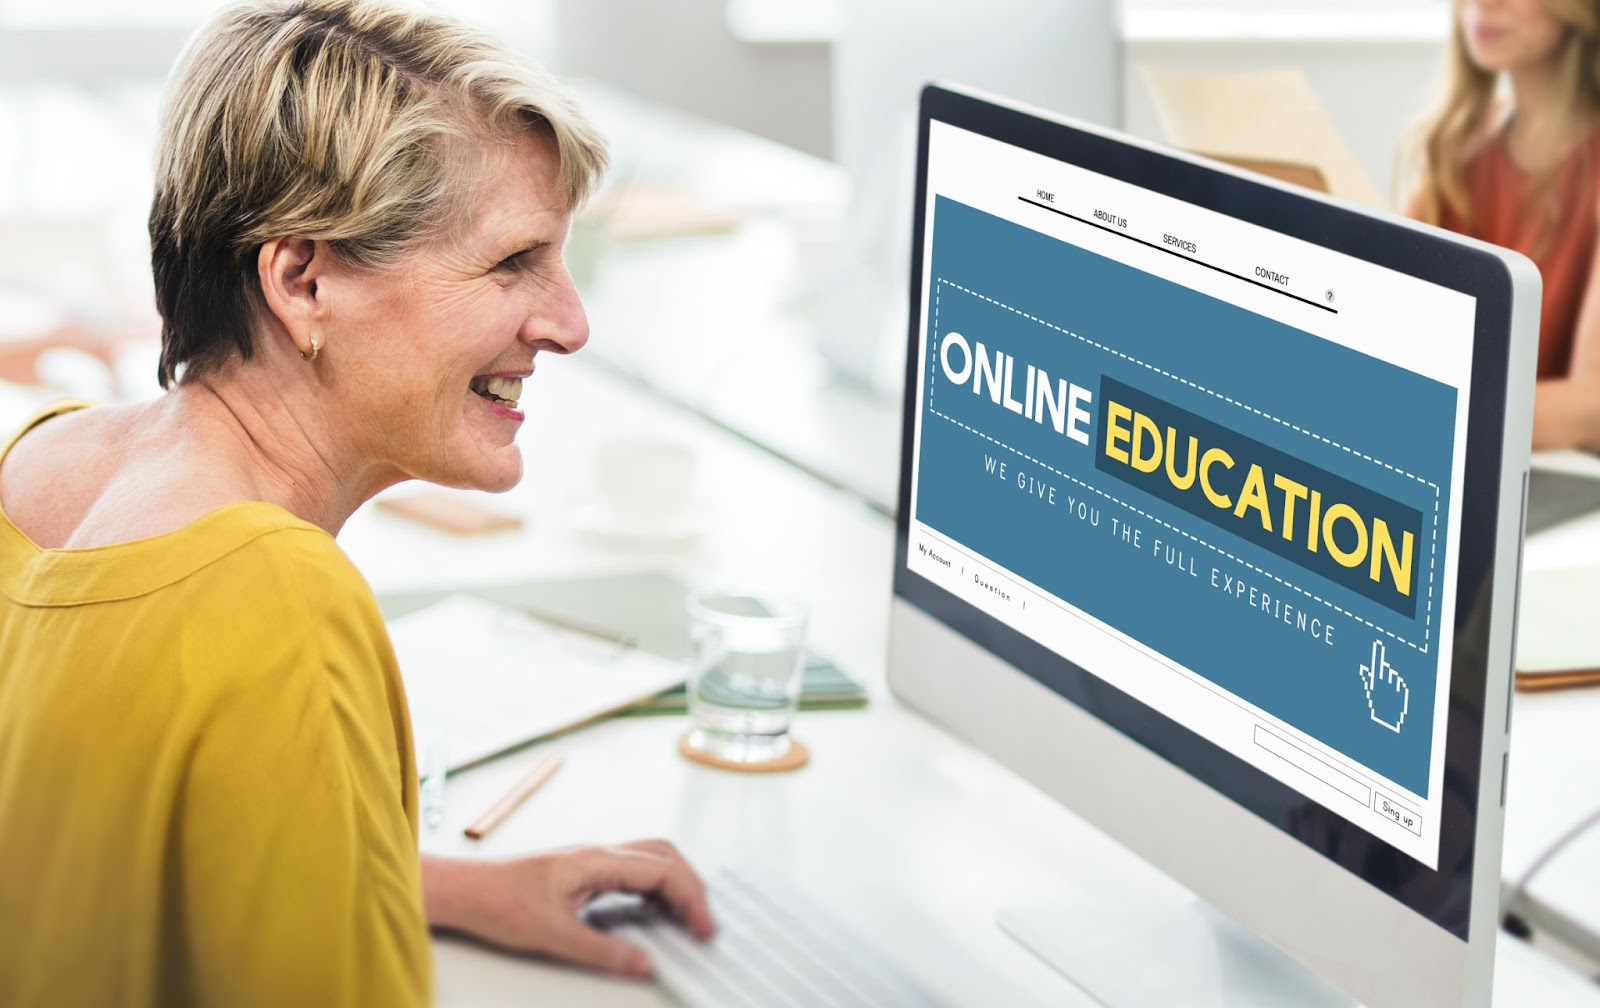 online-education-homepage-e-learning-technology-concept